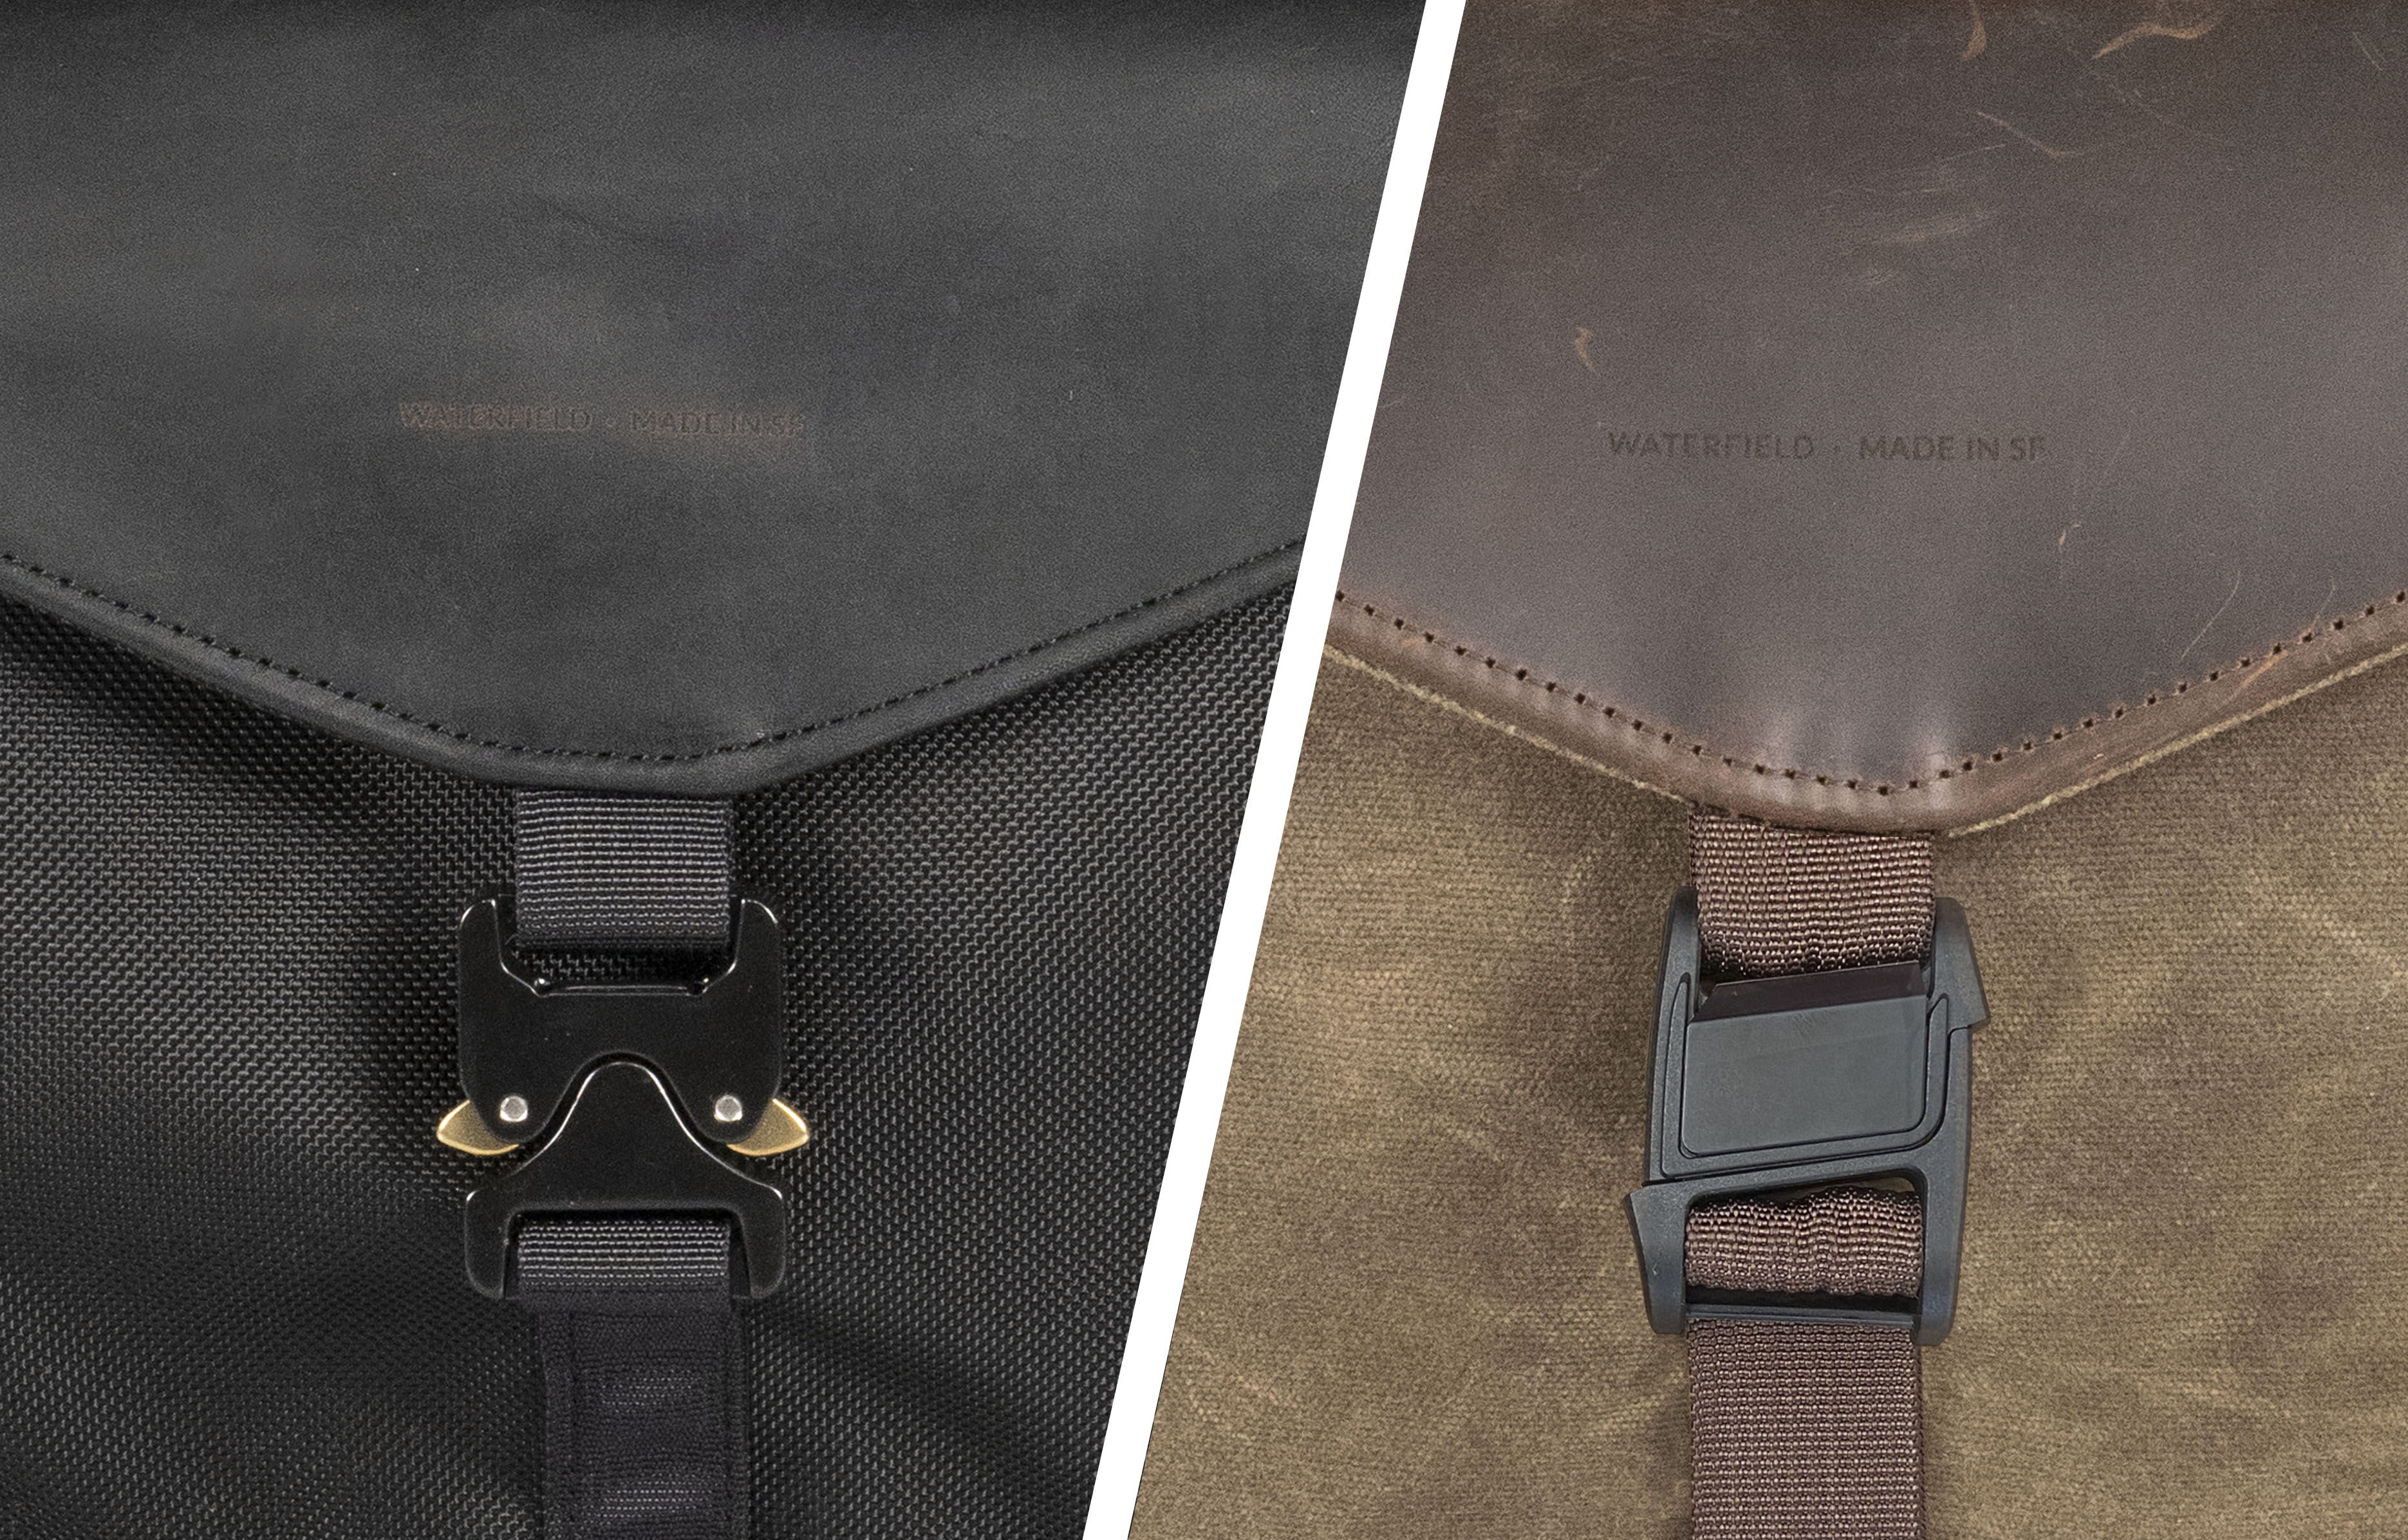 WaterField Pre-Launches Mezzo Backpack with Buckle Choice and